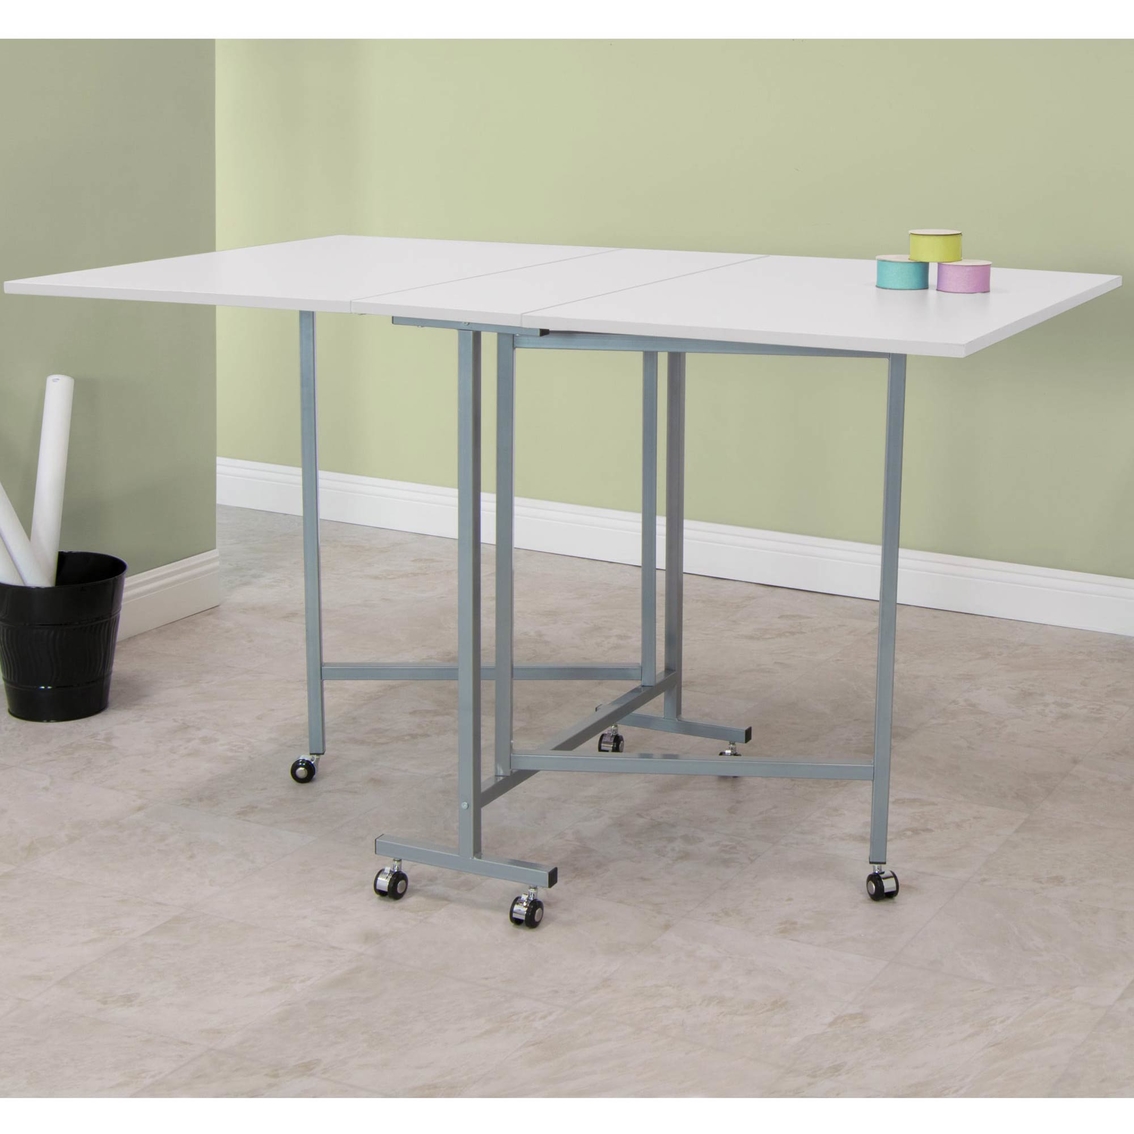 Studio Designs Home Craft and Cutting Table - Image 4 of 4